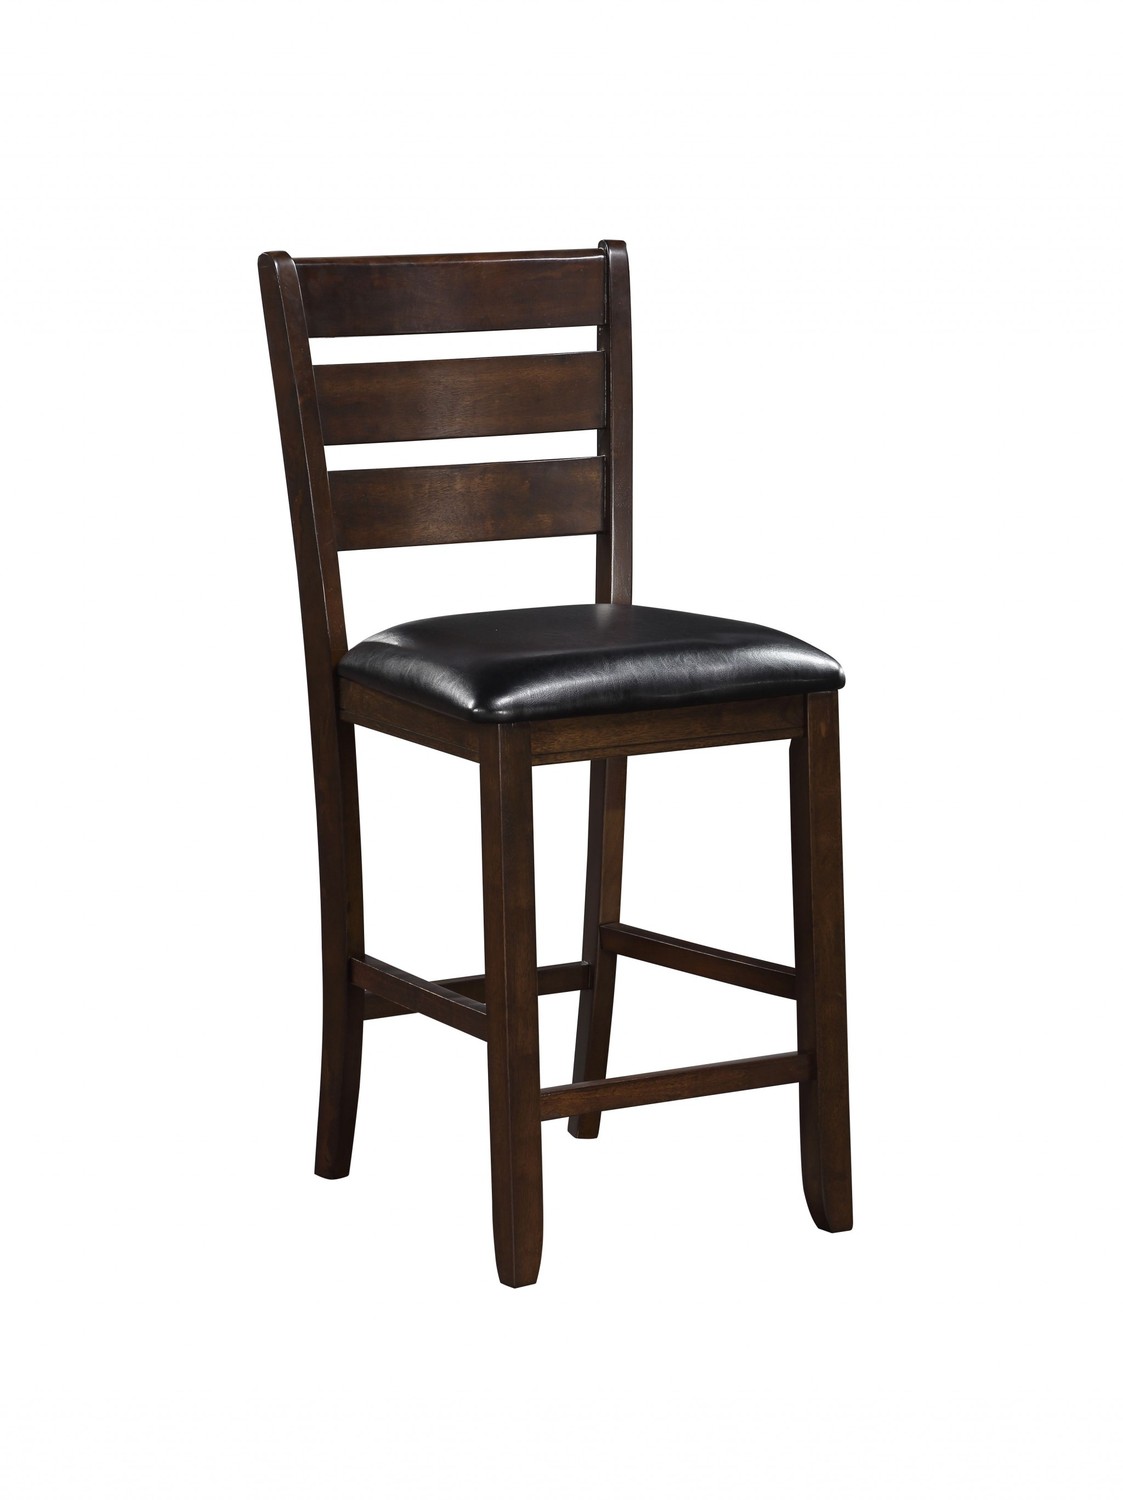 Set of 2 - 41" Dark Wood Finsh and Black Faux Leather Ladder Back Counter Height Chairs